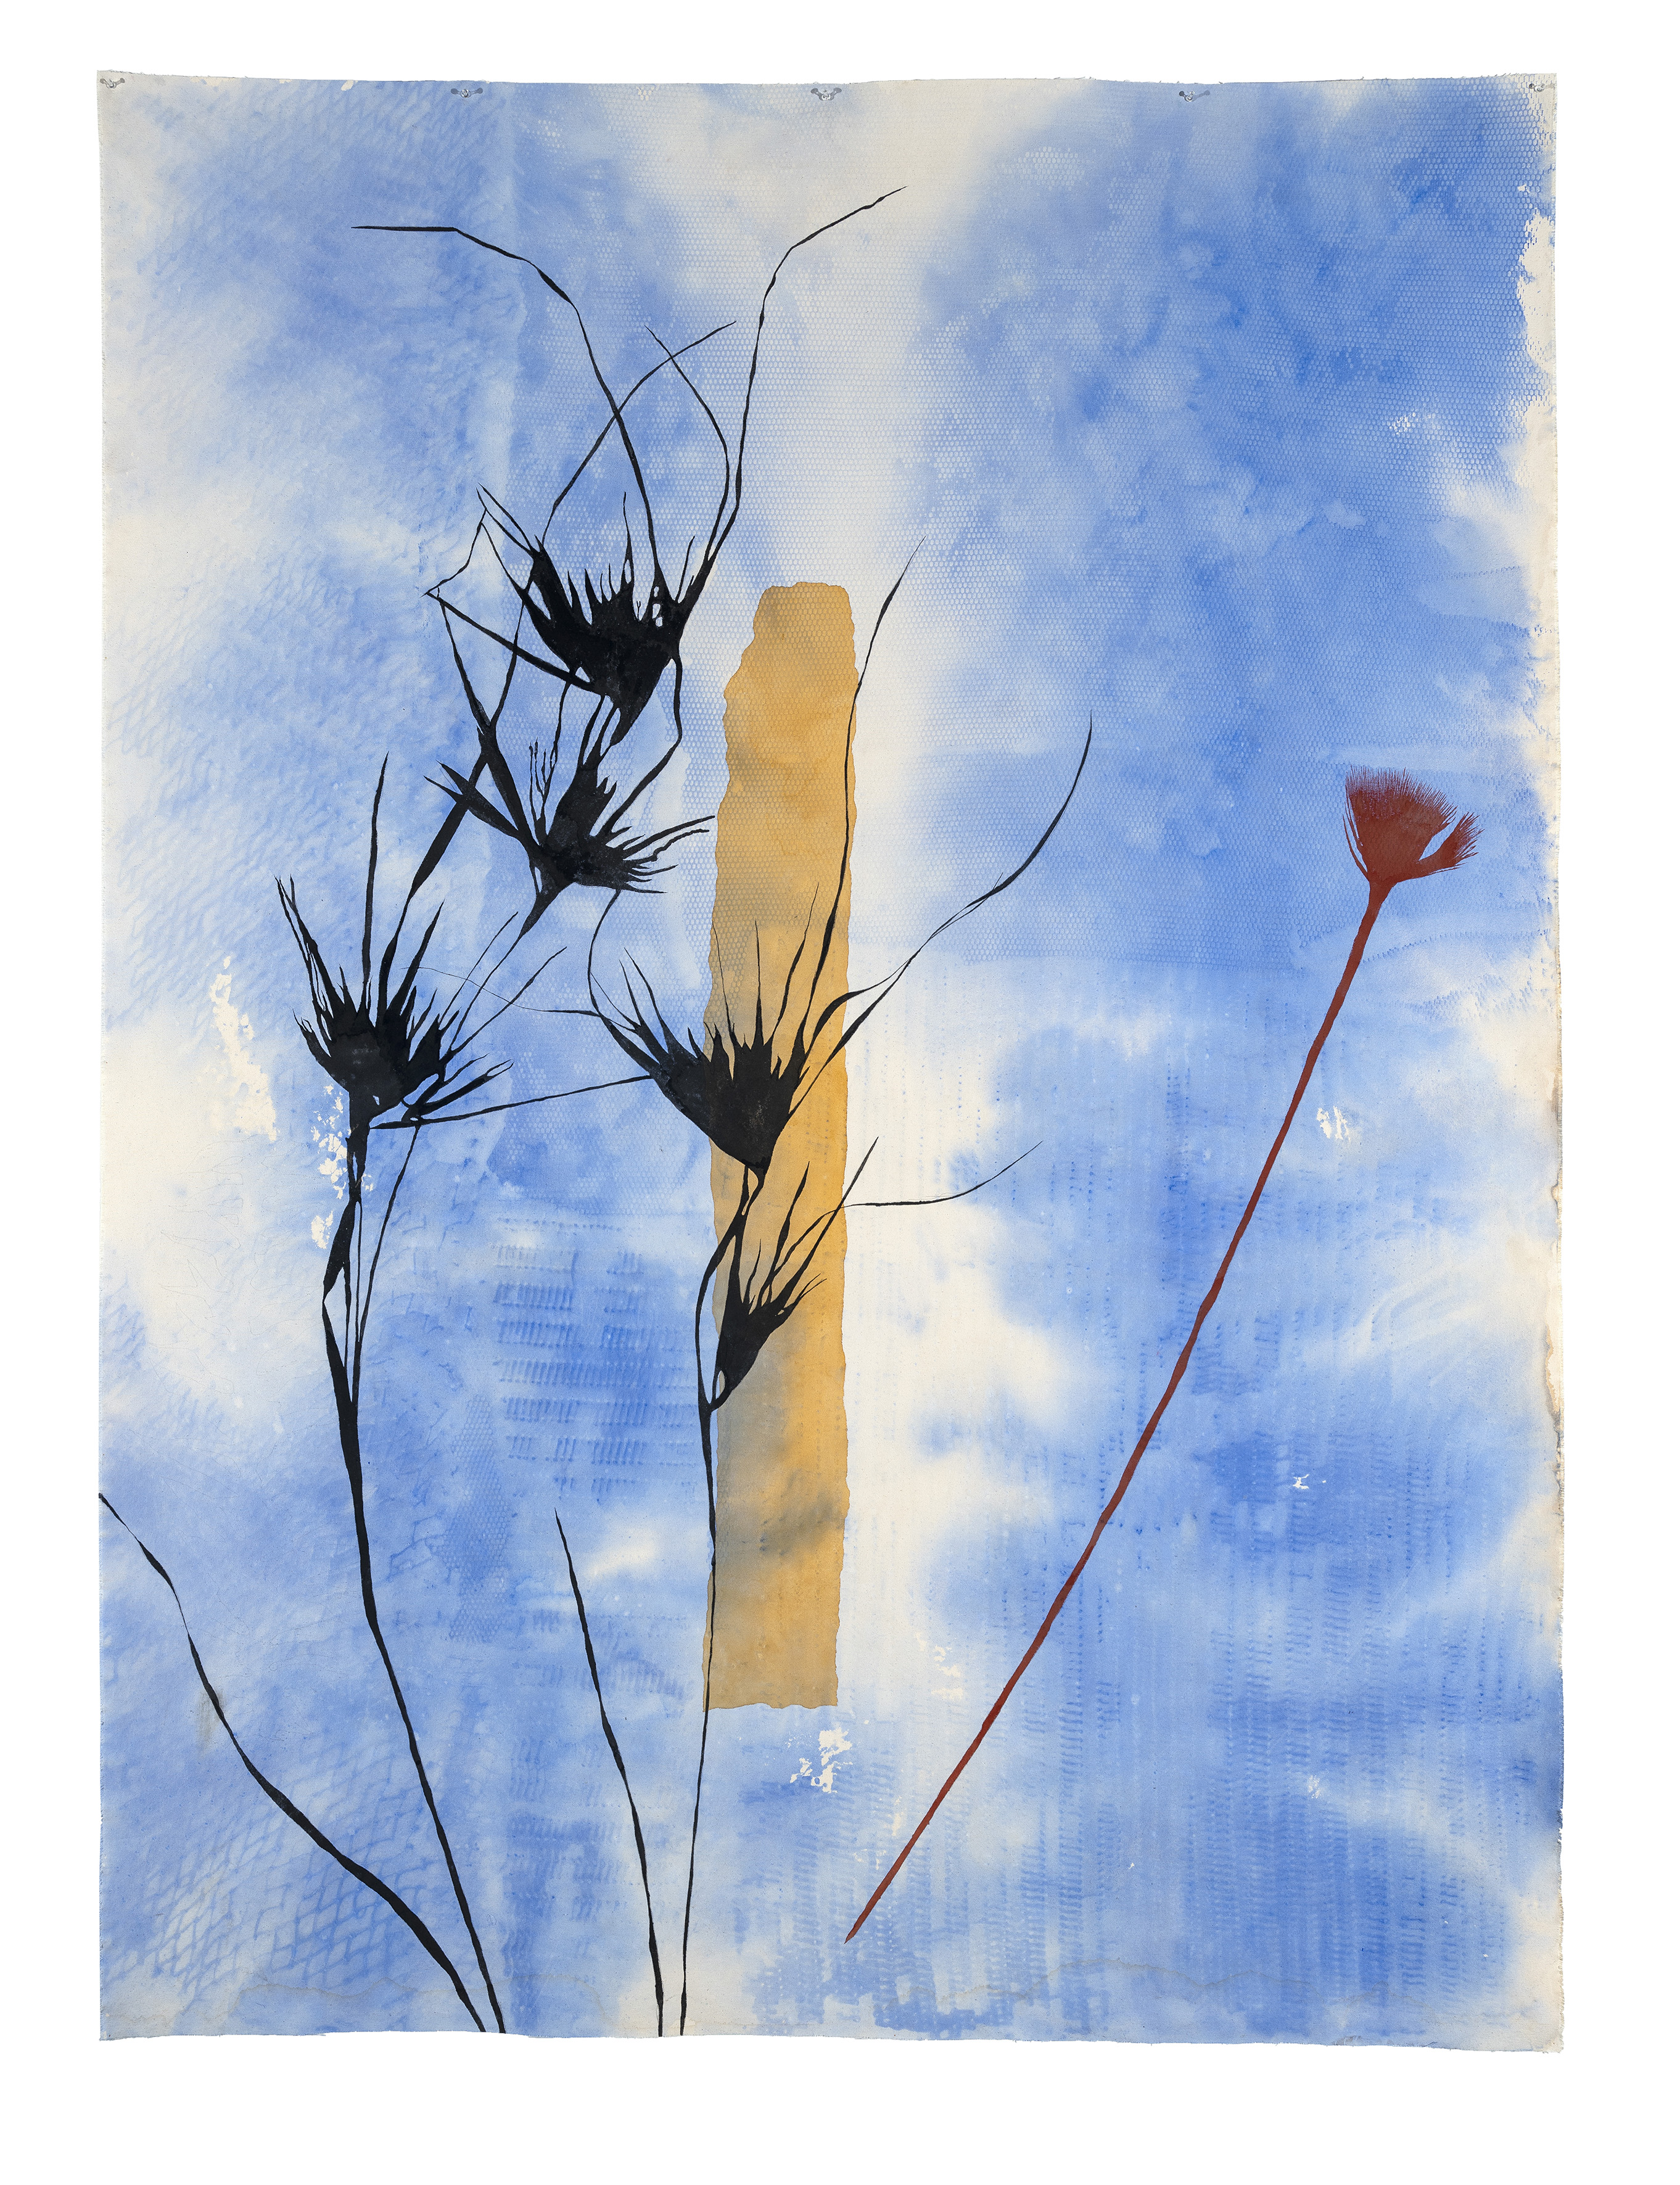 Judy WATSON standing stone, kangaroo grass, red and yellow ochre 2020, acrylic and graphite on canvas, 250 x 181.5cm, Courtesy of the artist and Milani Gallery, Brisbane. Photo: Carl Warner. 